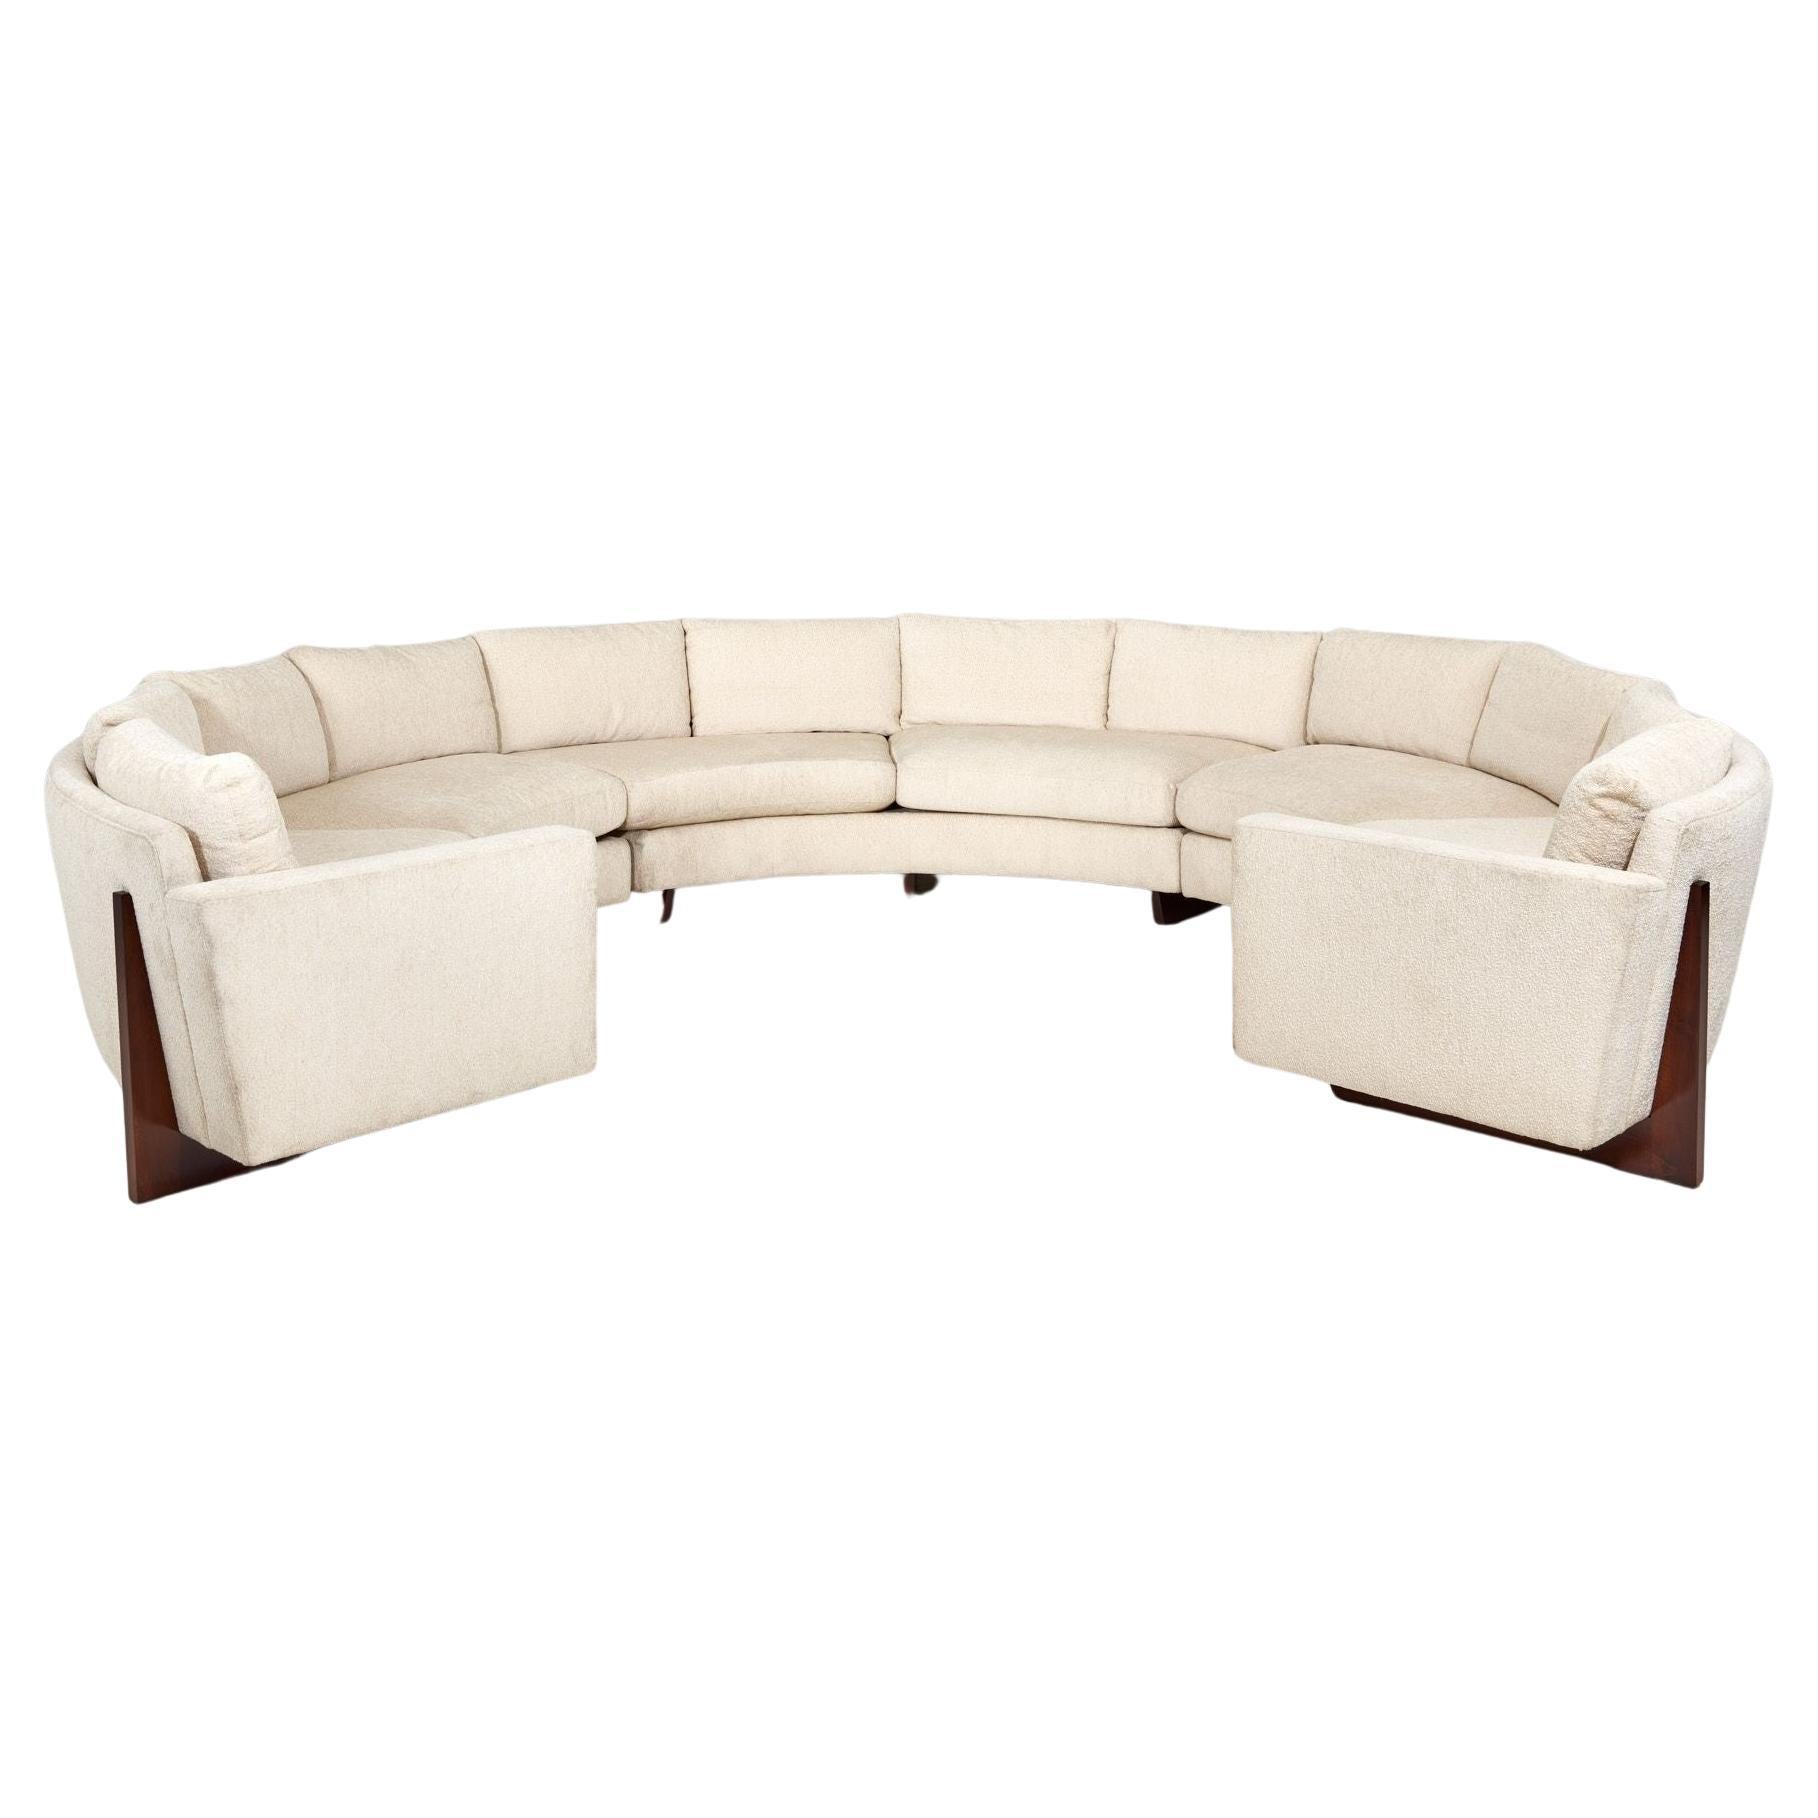 Monumental Milo Baughman Circular Sectional Sofa w/walnut for Thayer Coggin, 1960. Original upholstery in excellent vintage condition. Walnut has been restored.